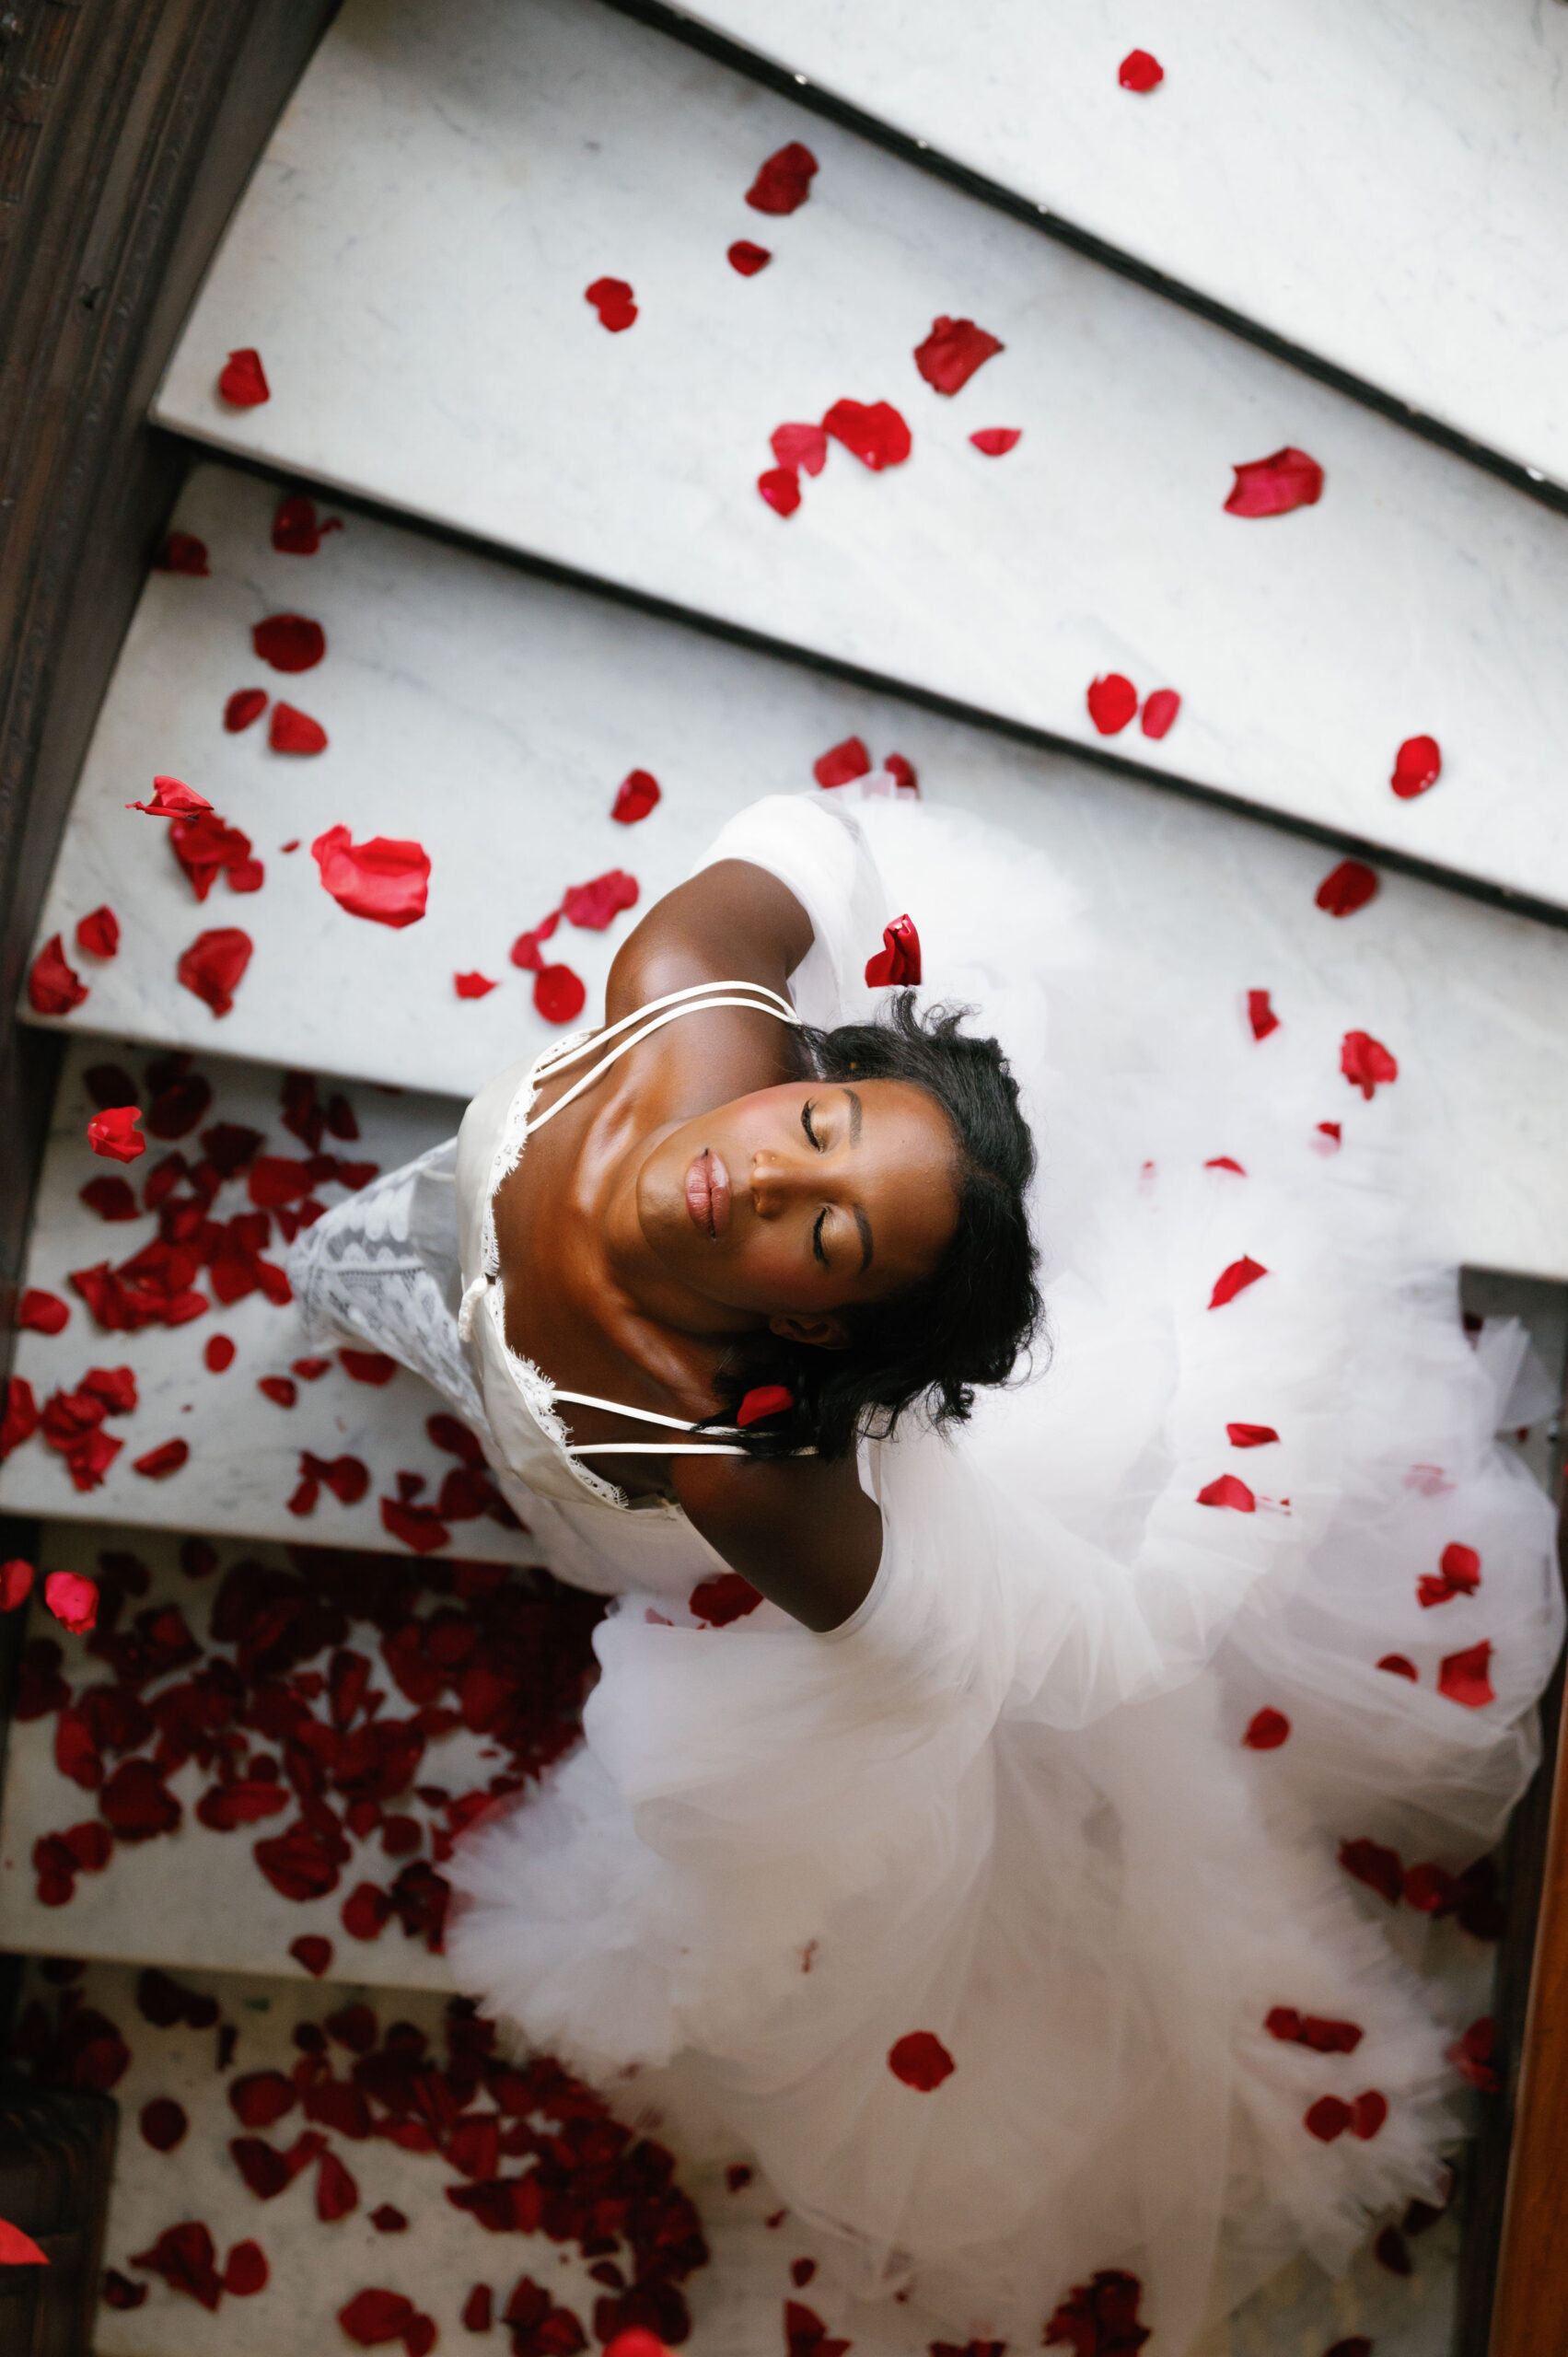 A romantic boudoir session at The Rookery in Chicago, IL.